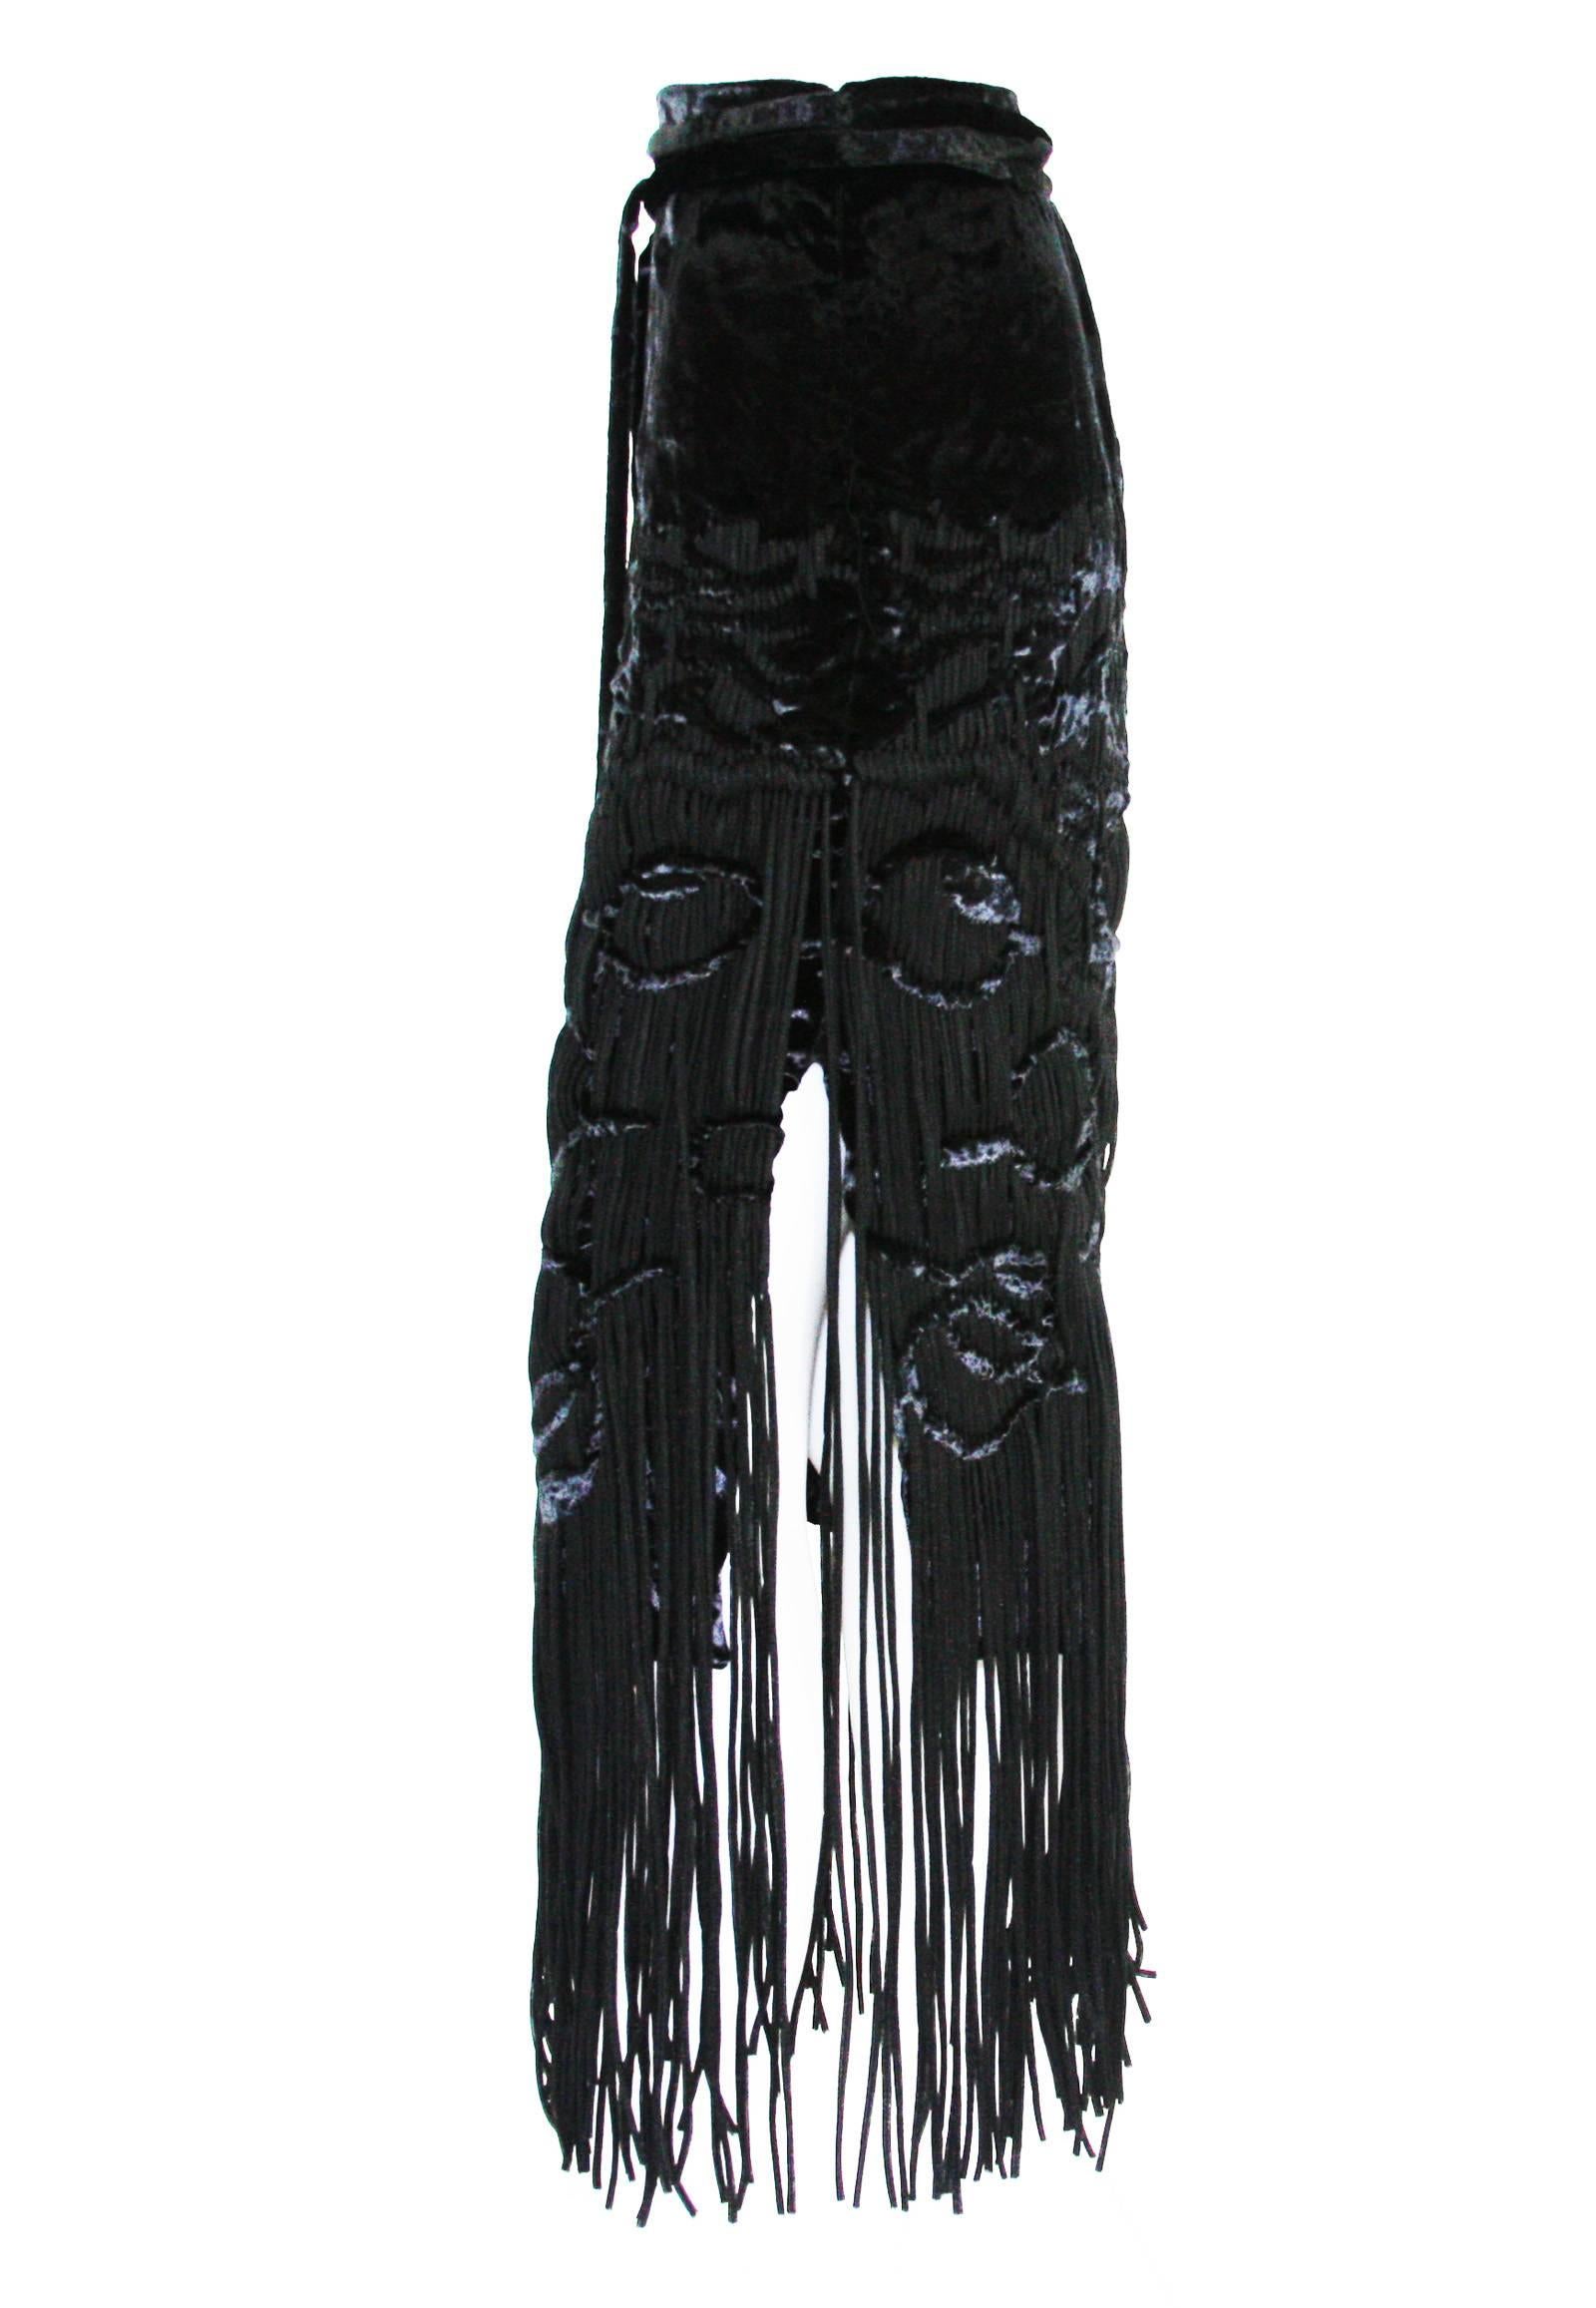 New Tom Ford for Yves Saint Lauren Velvet Fringe Silk Skirt
F/W 2001 Runway Collection
Fr. size 38 - US 6
The design of this skirt is extraordinary with the tassels being woven in and out of the crushed velvet.
The back includes an attached cinch